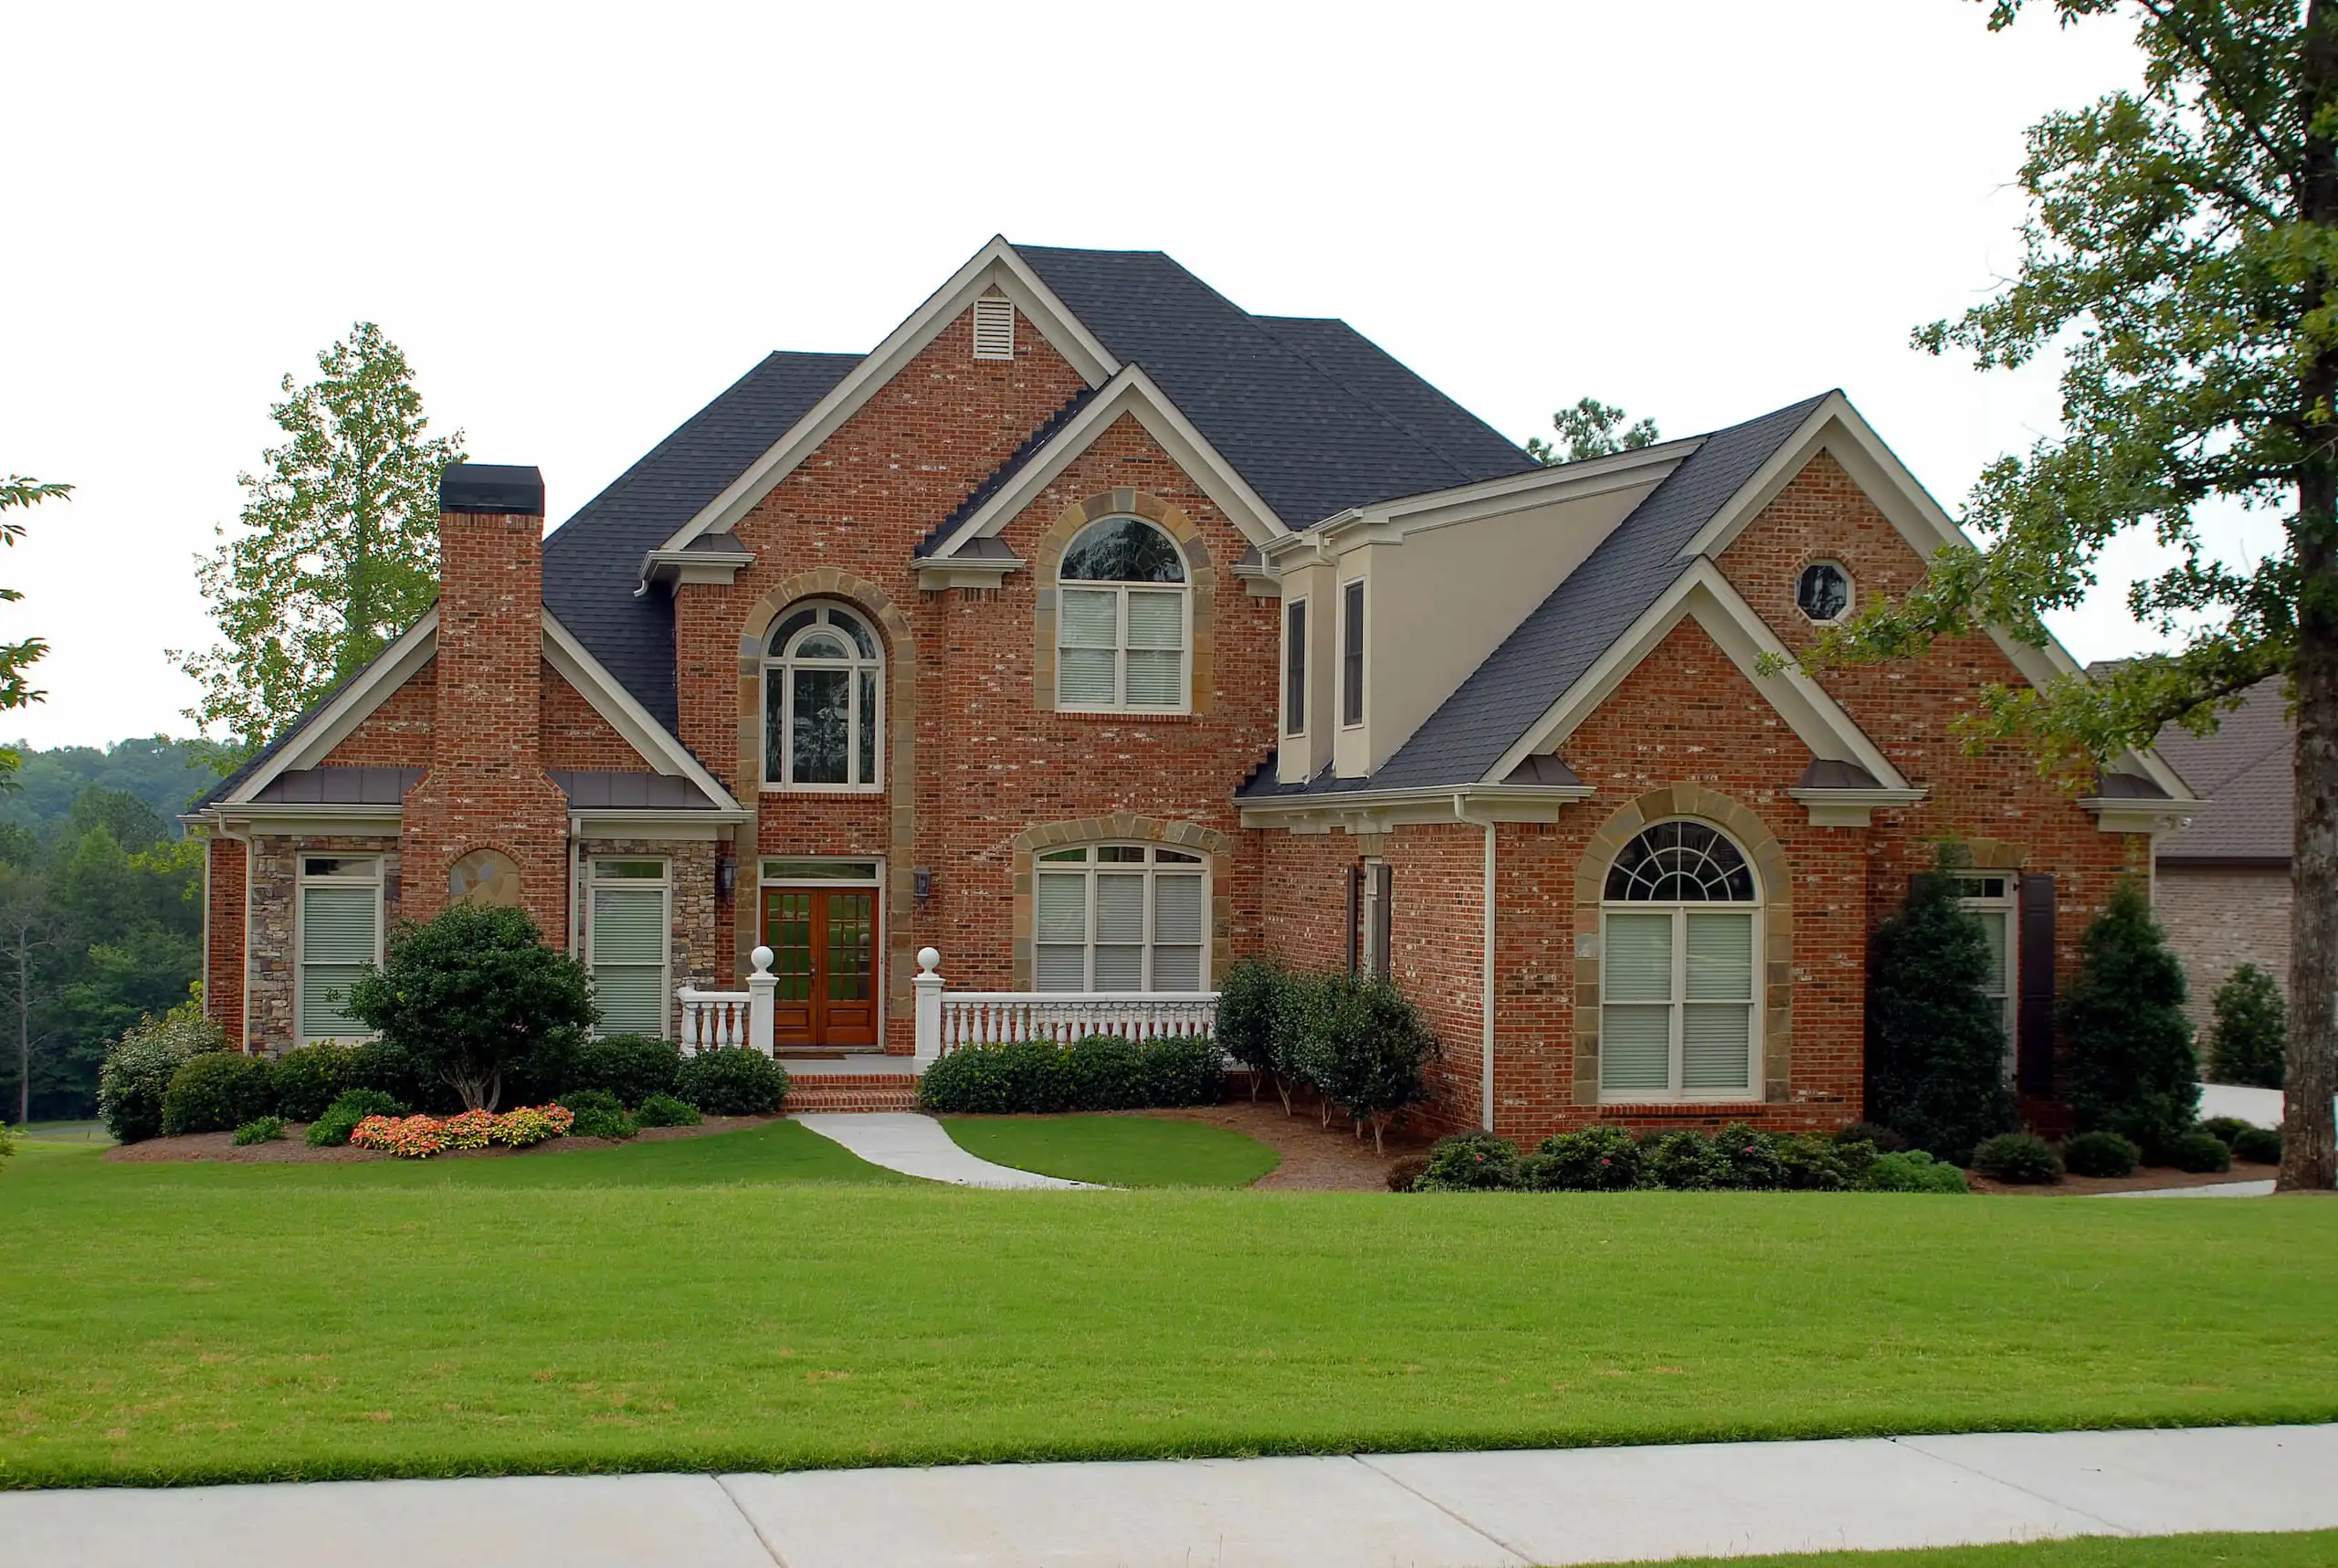 Residential brick house - Keep pests away with Arrow Exterminators, Inc. in OK